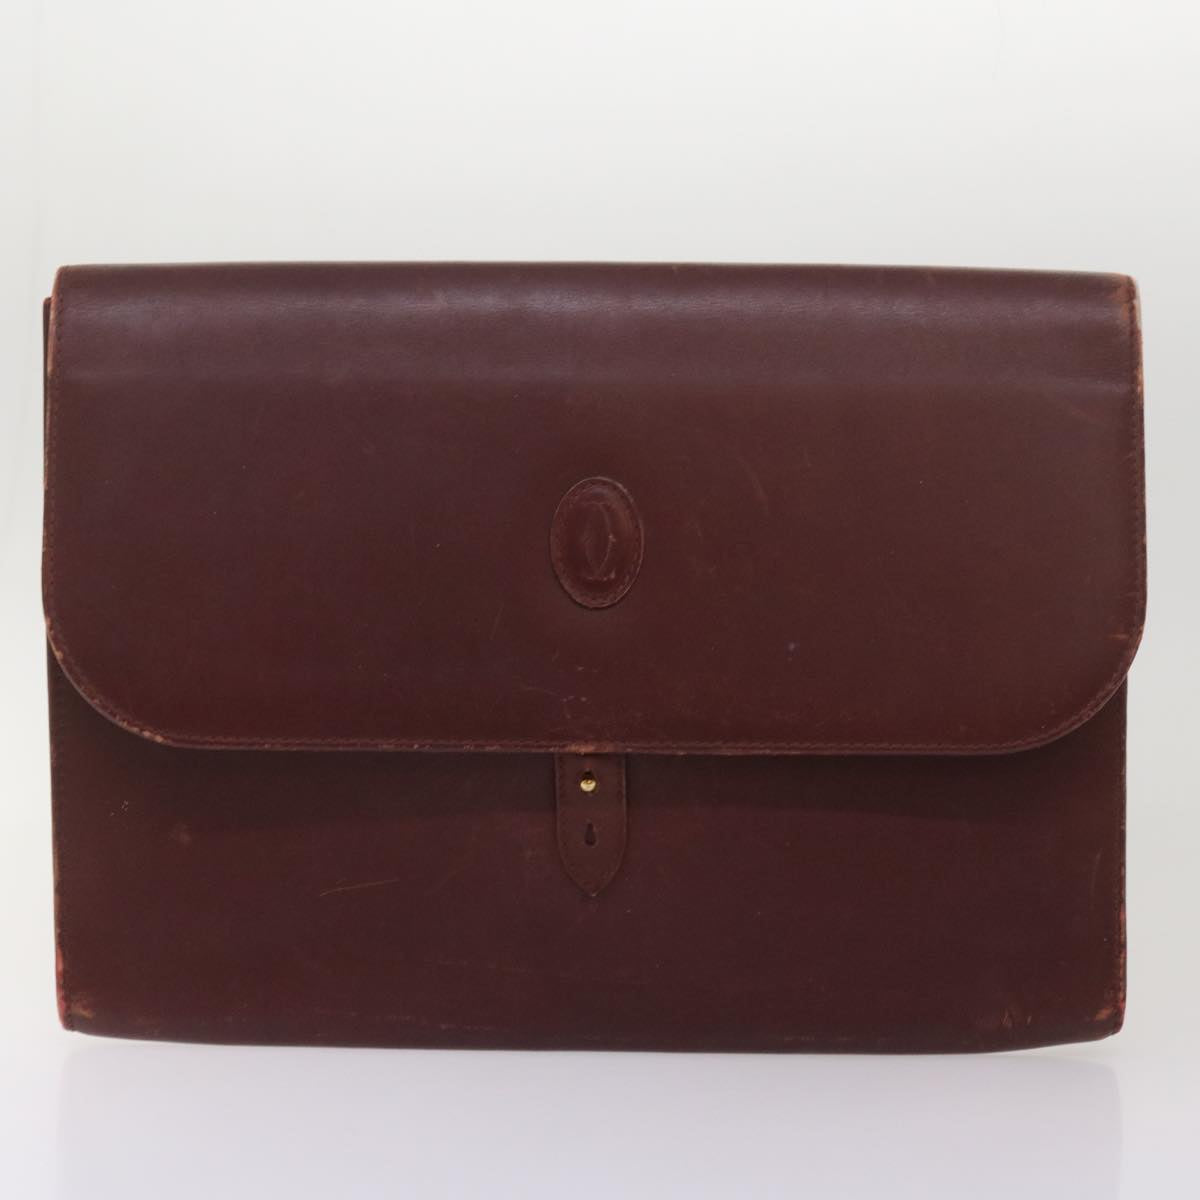 CARTIER Clutch Bag Leather 2Set Wine Red Auth bs12440 - 0